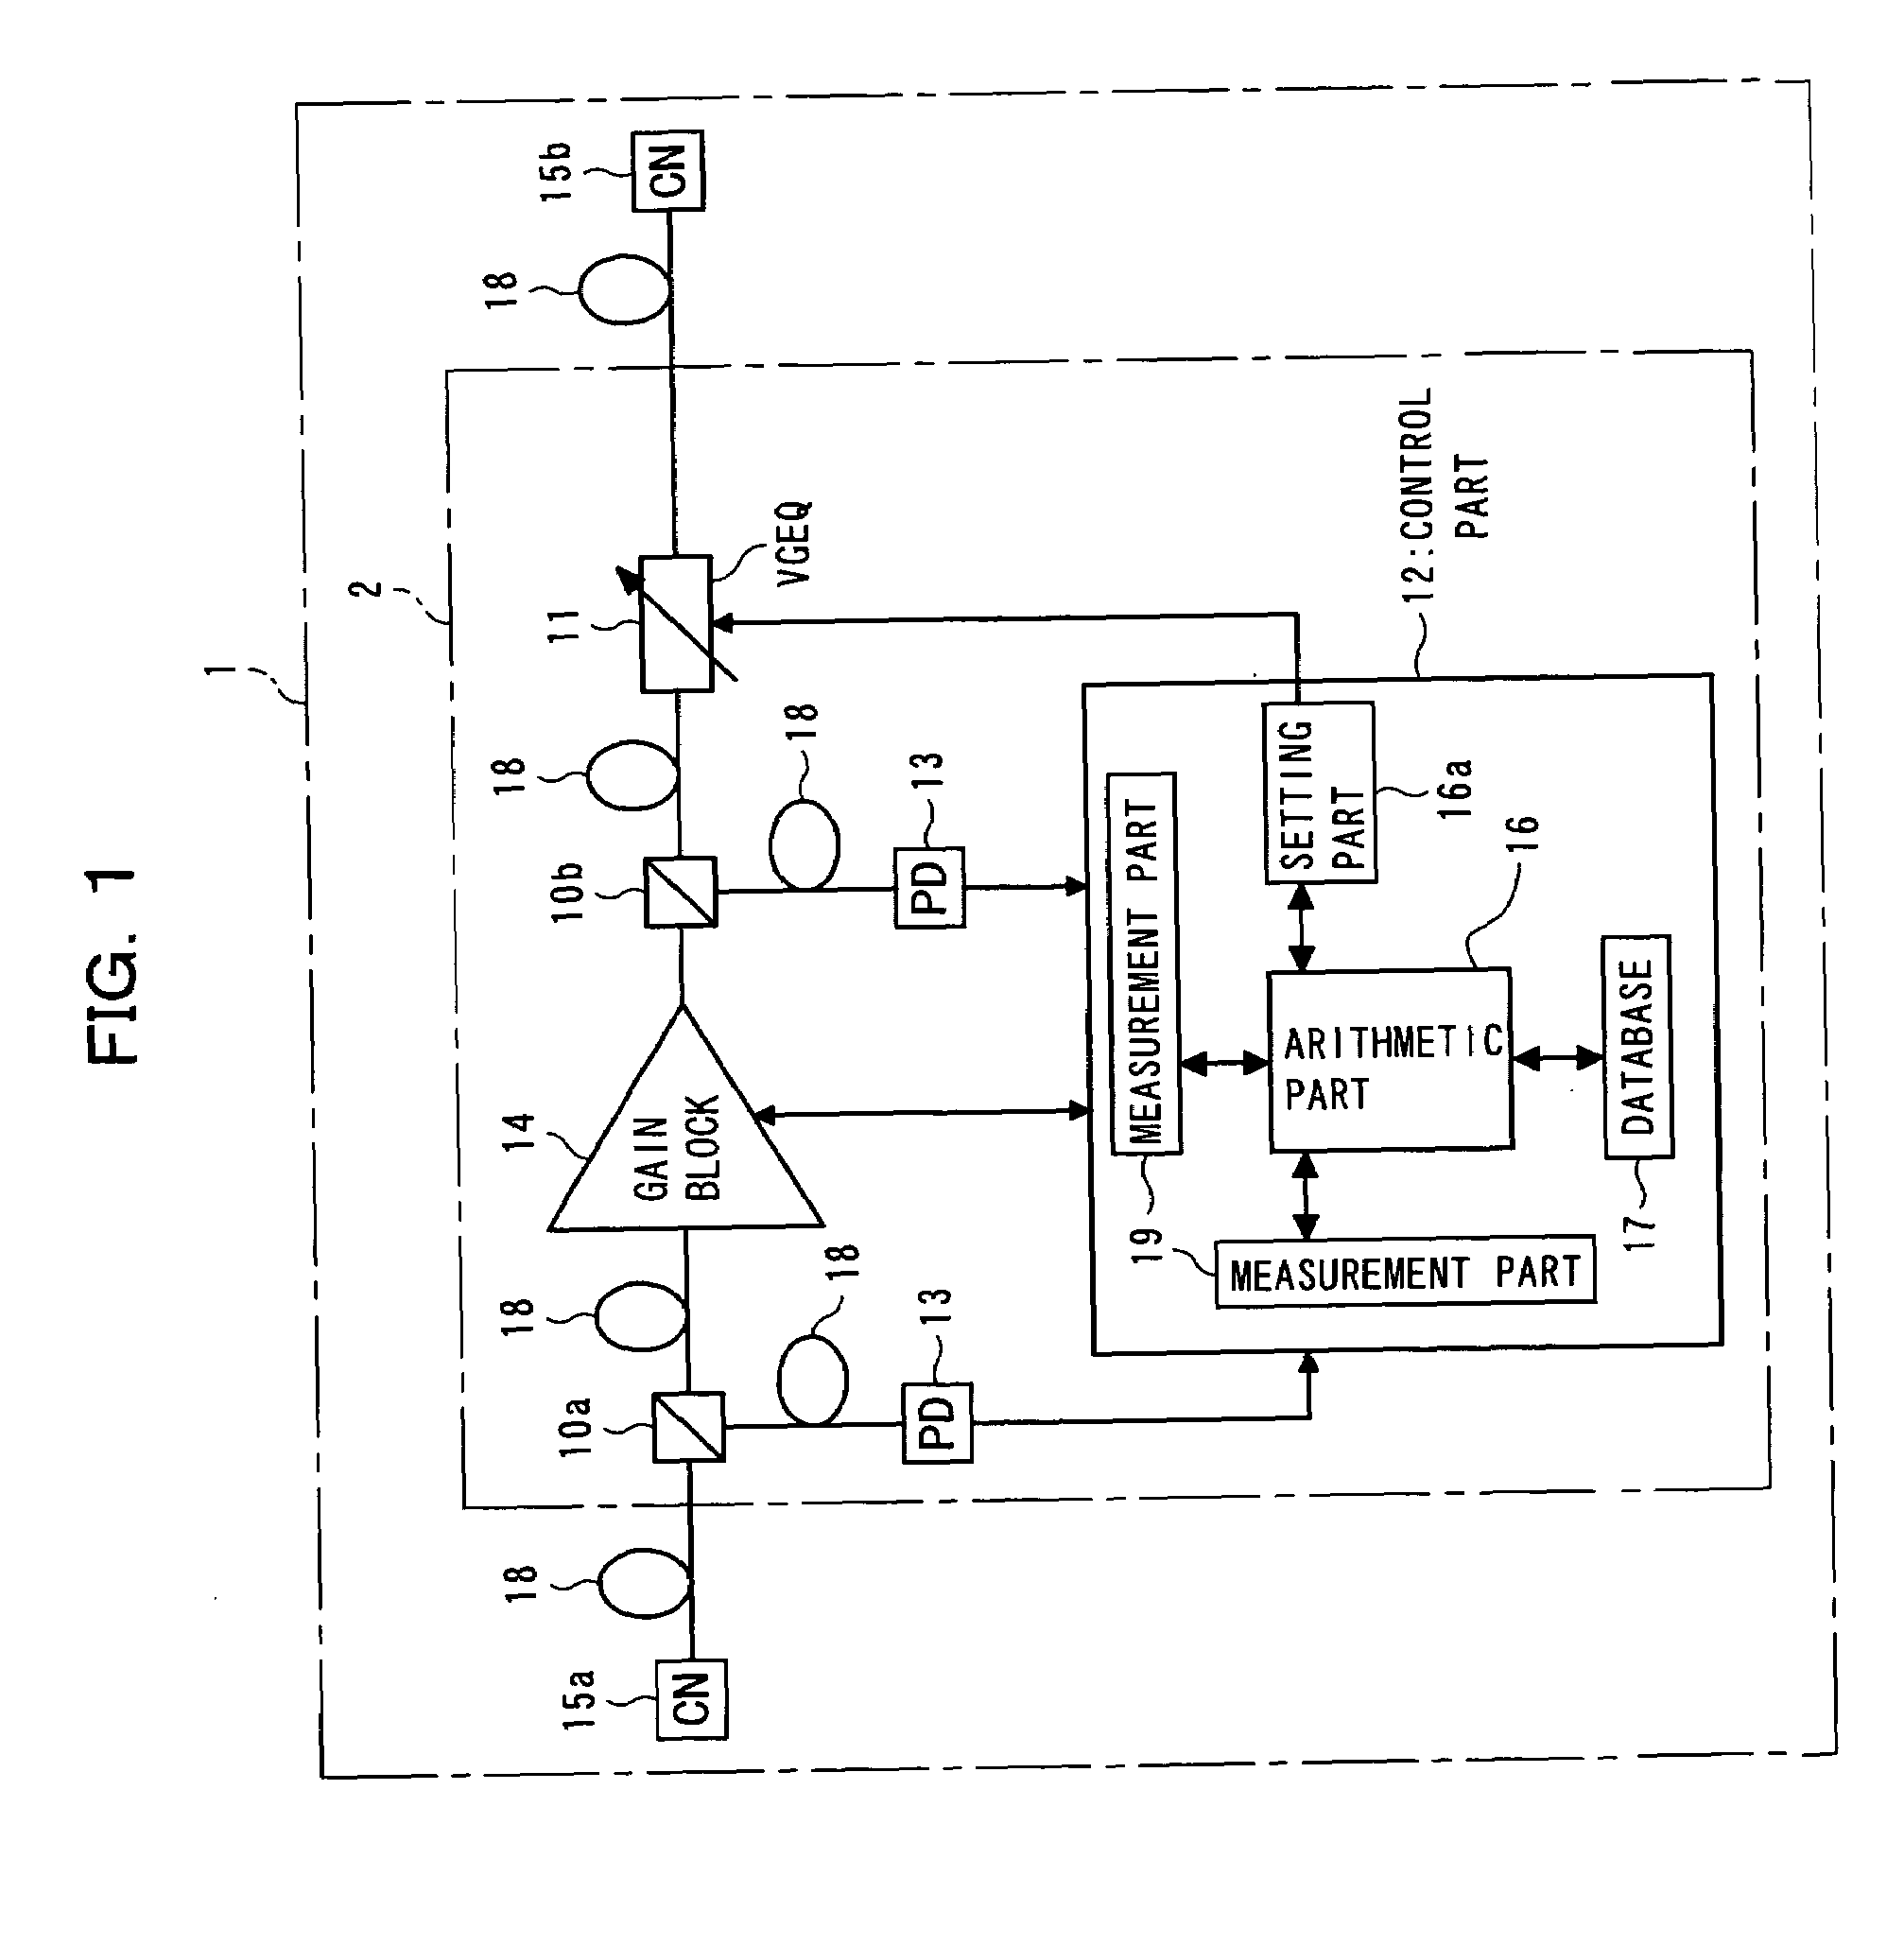 Optical amplifier with variable gain equalization